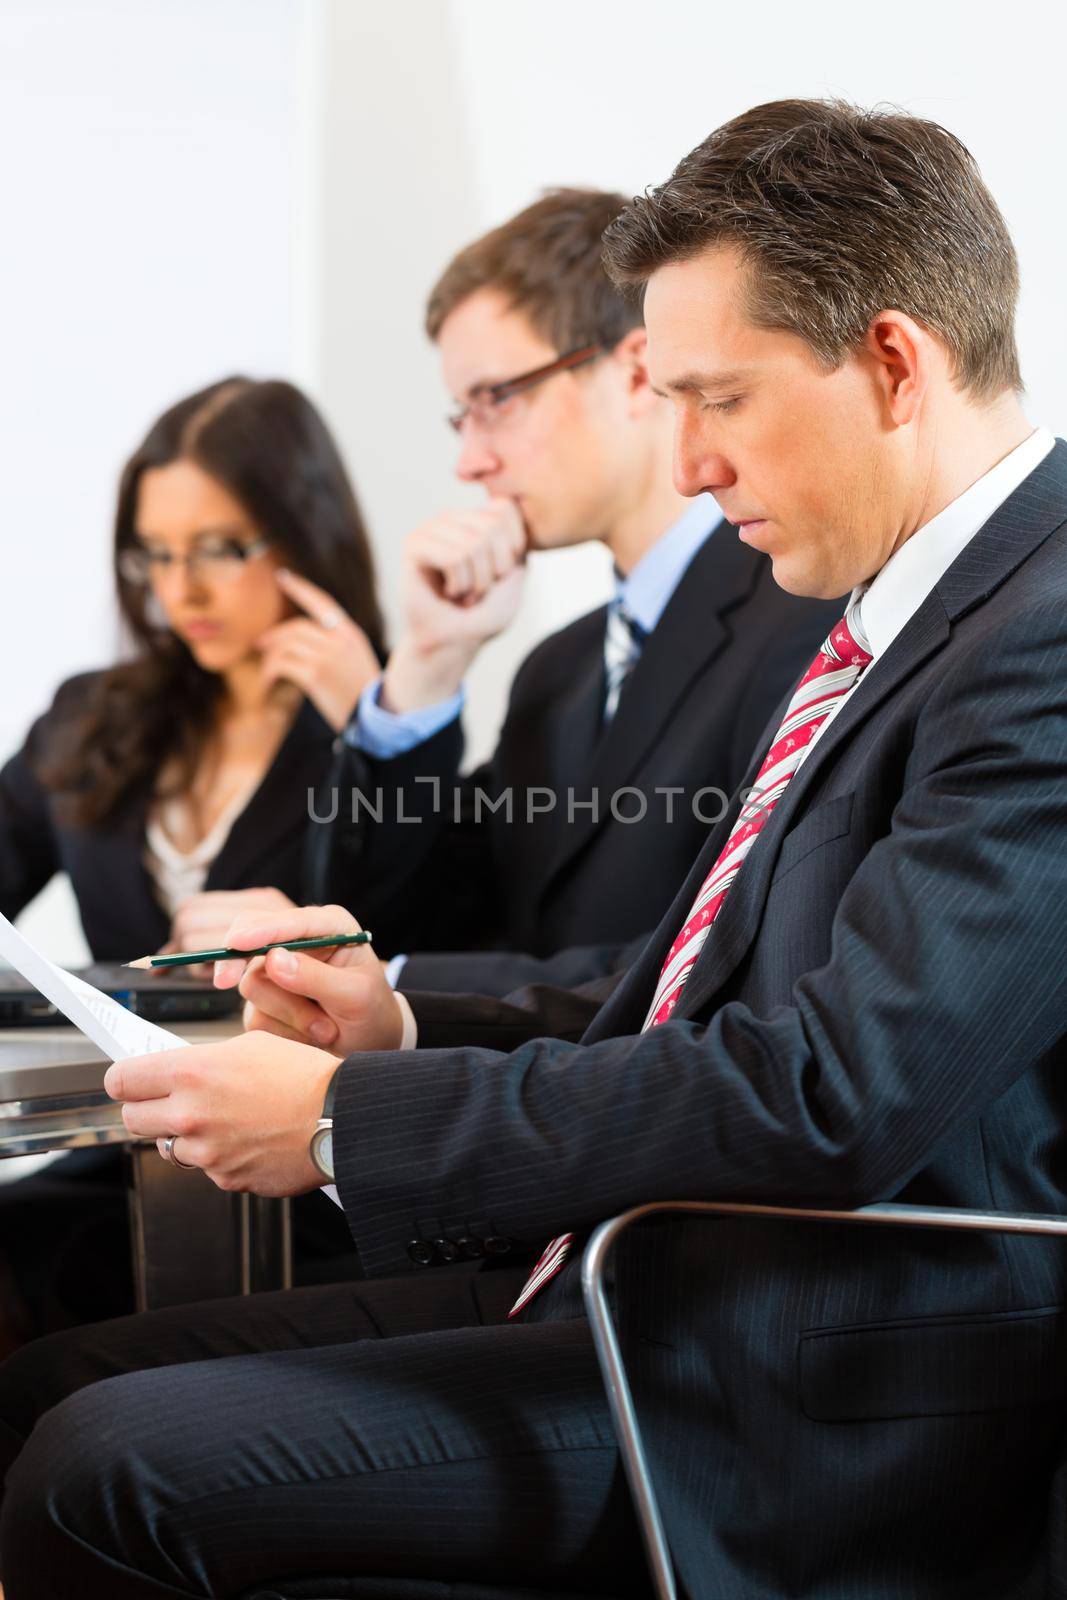 Business people sitting in a meeting or workshop in an office